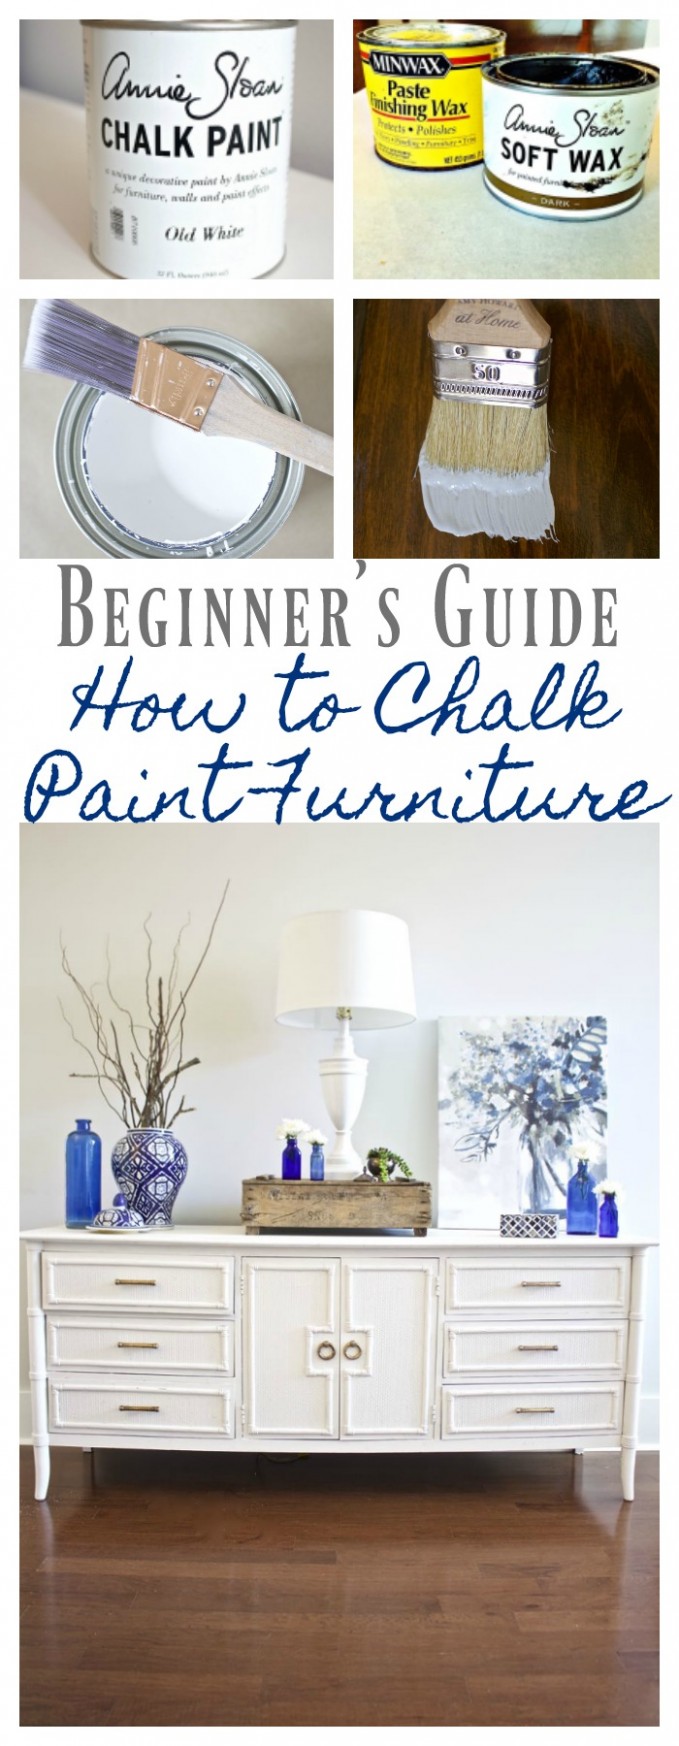 How To Chalk Paint Furniture Our Best Tips 9 Bees In A Pod Annie Sloan Chalk Paint Color Guide